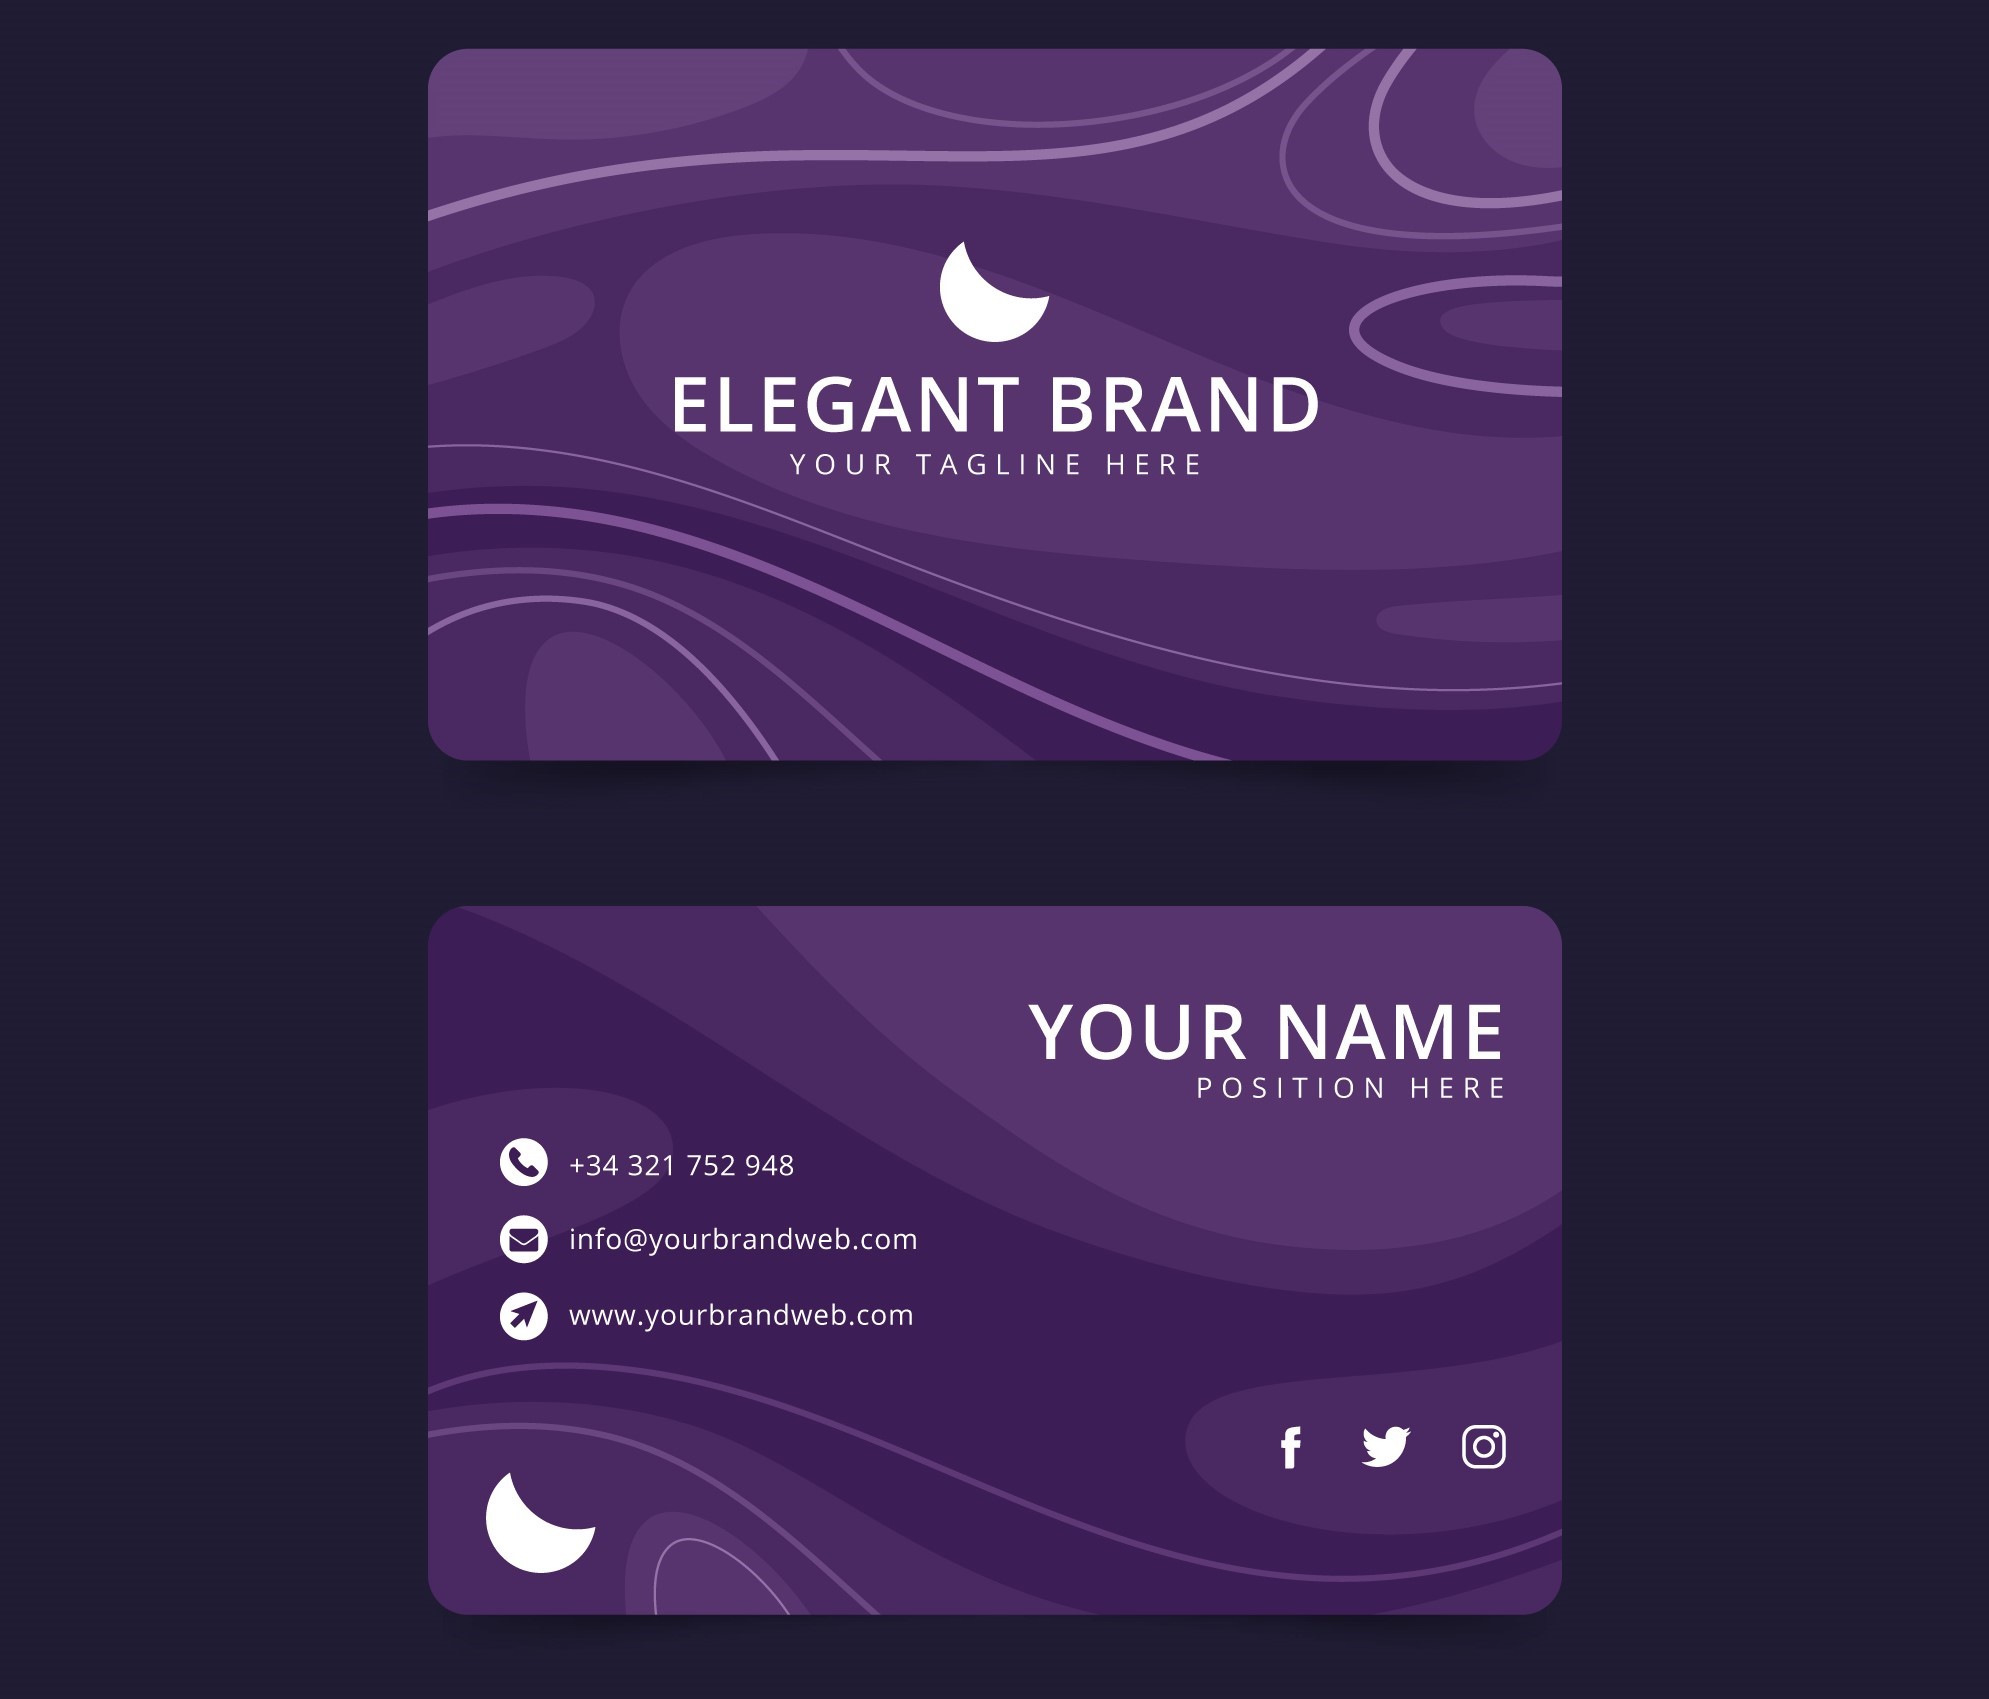 Social Media Icons For Business Cards Vistaprint